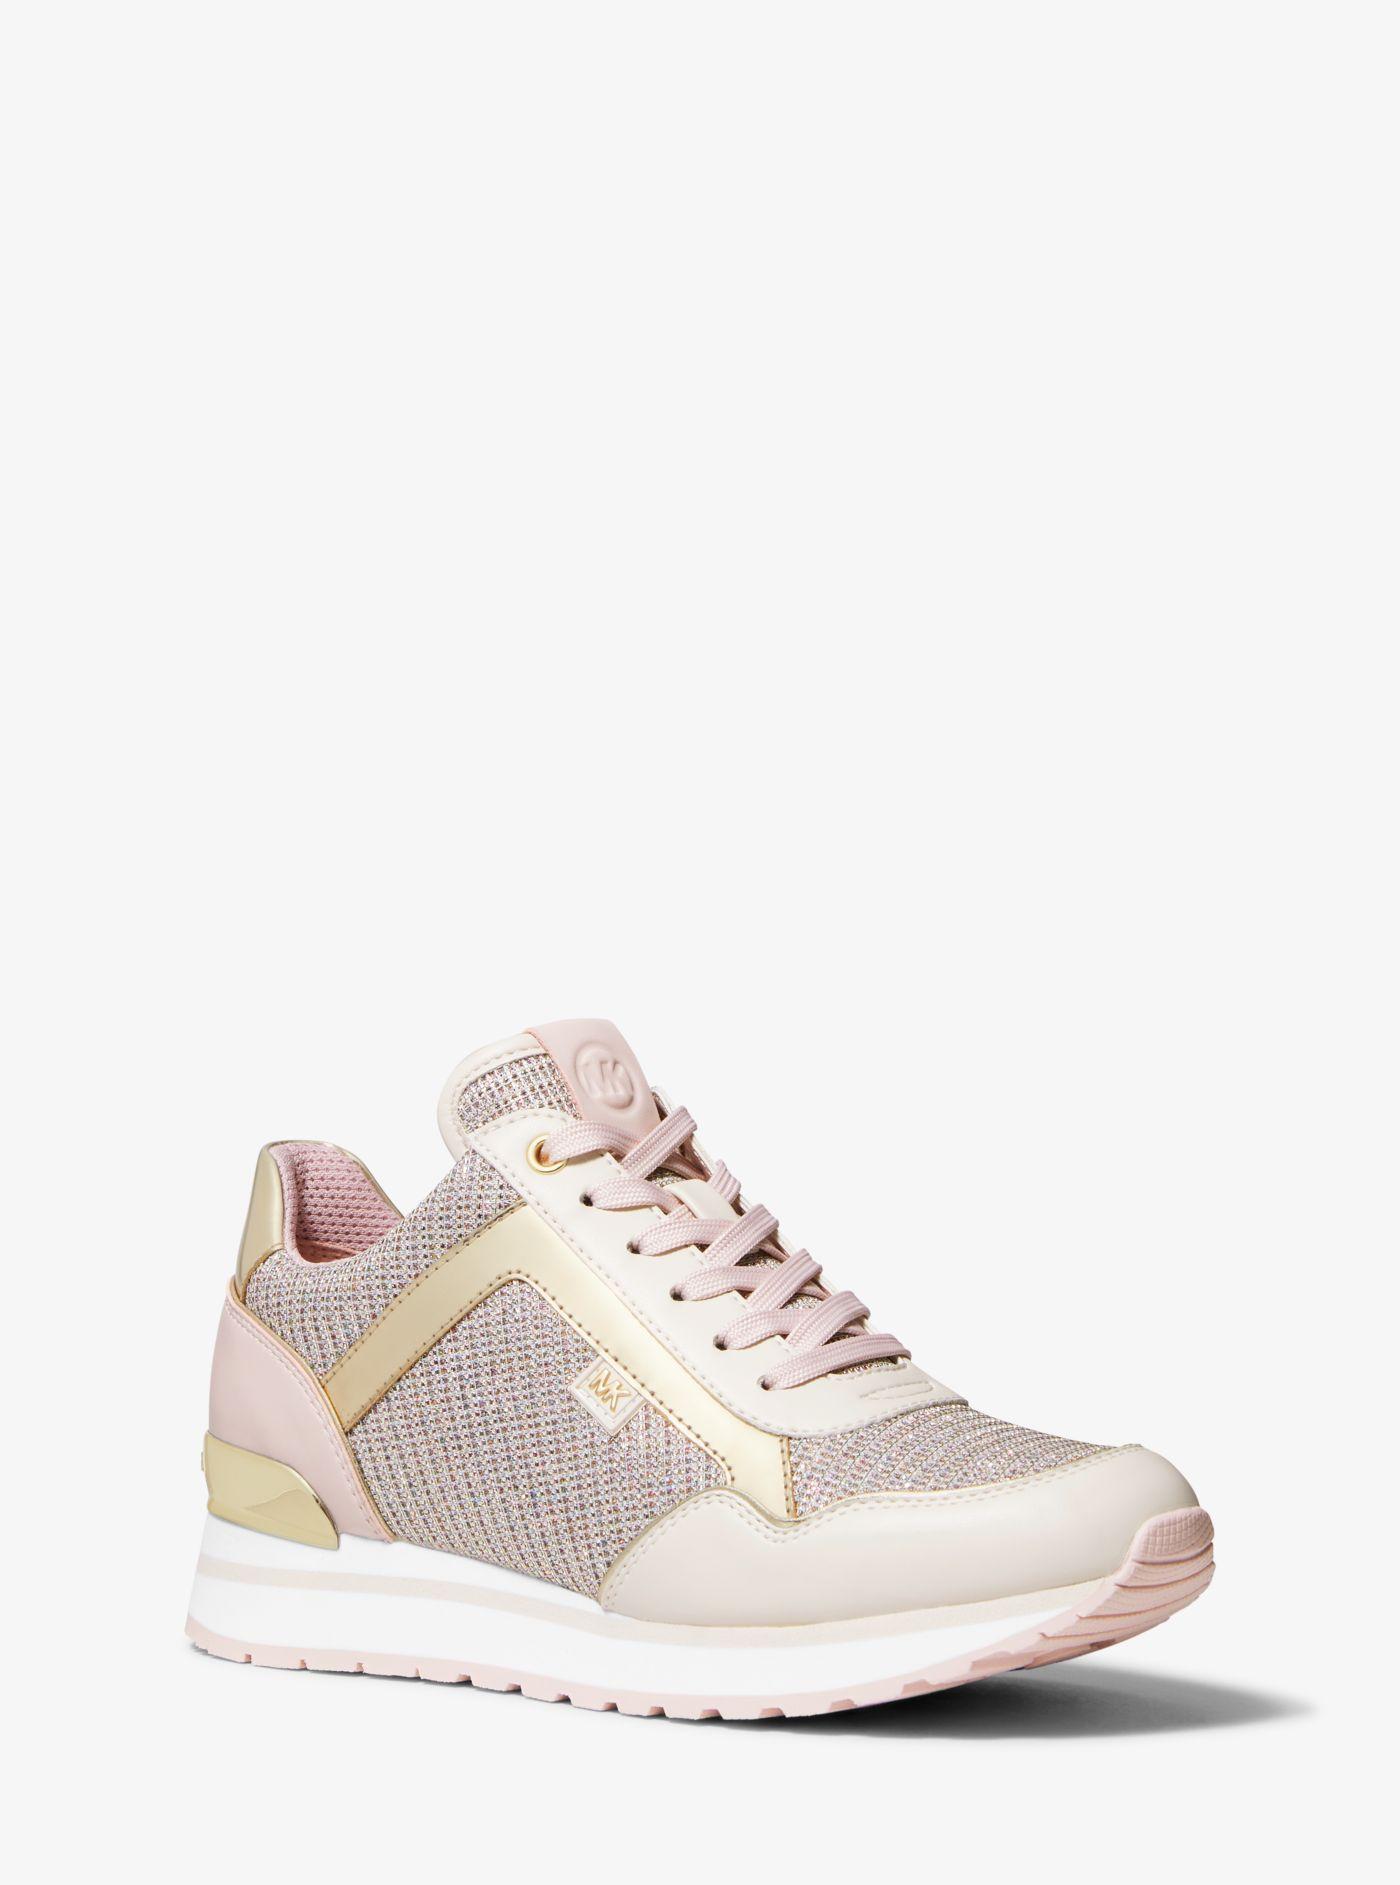 Michael Kors Maddy Leather And Glitter Chain-mesh Trainer | Lyst